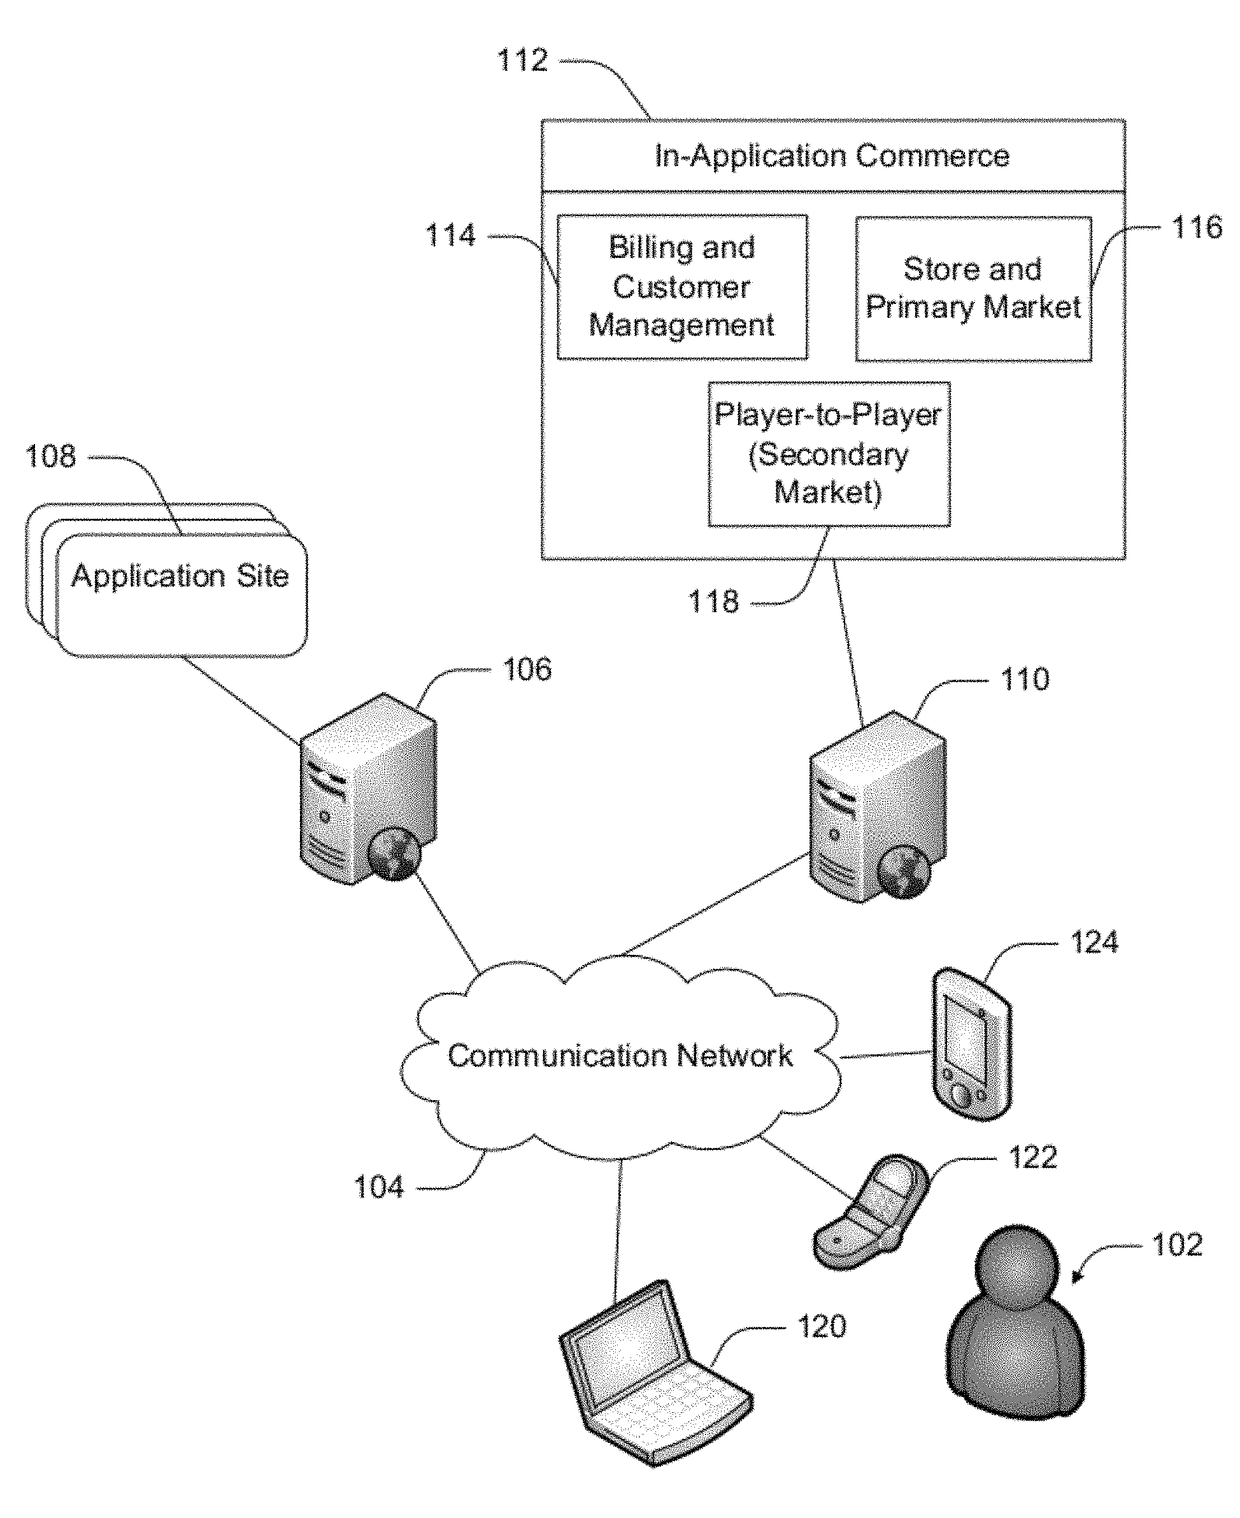 In-application commerce system and method with fraud prevention, management and control